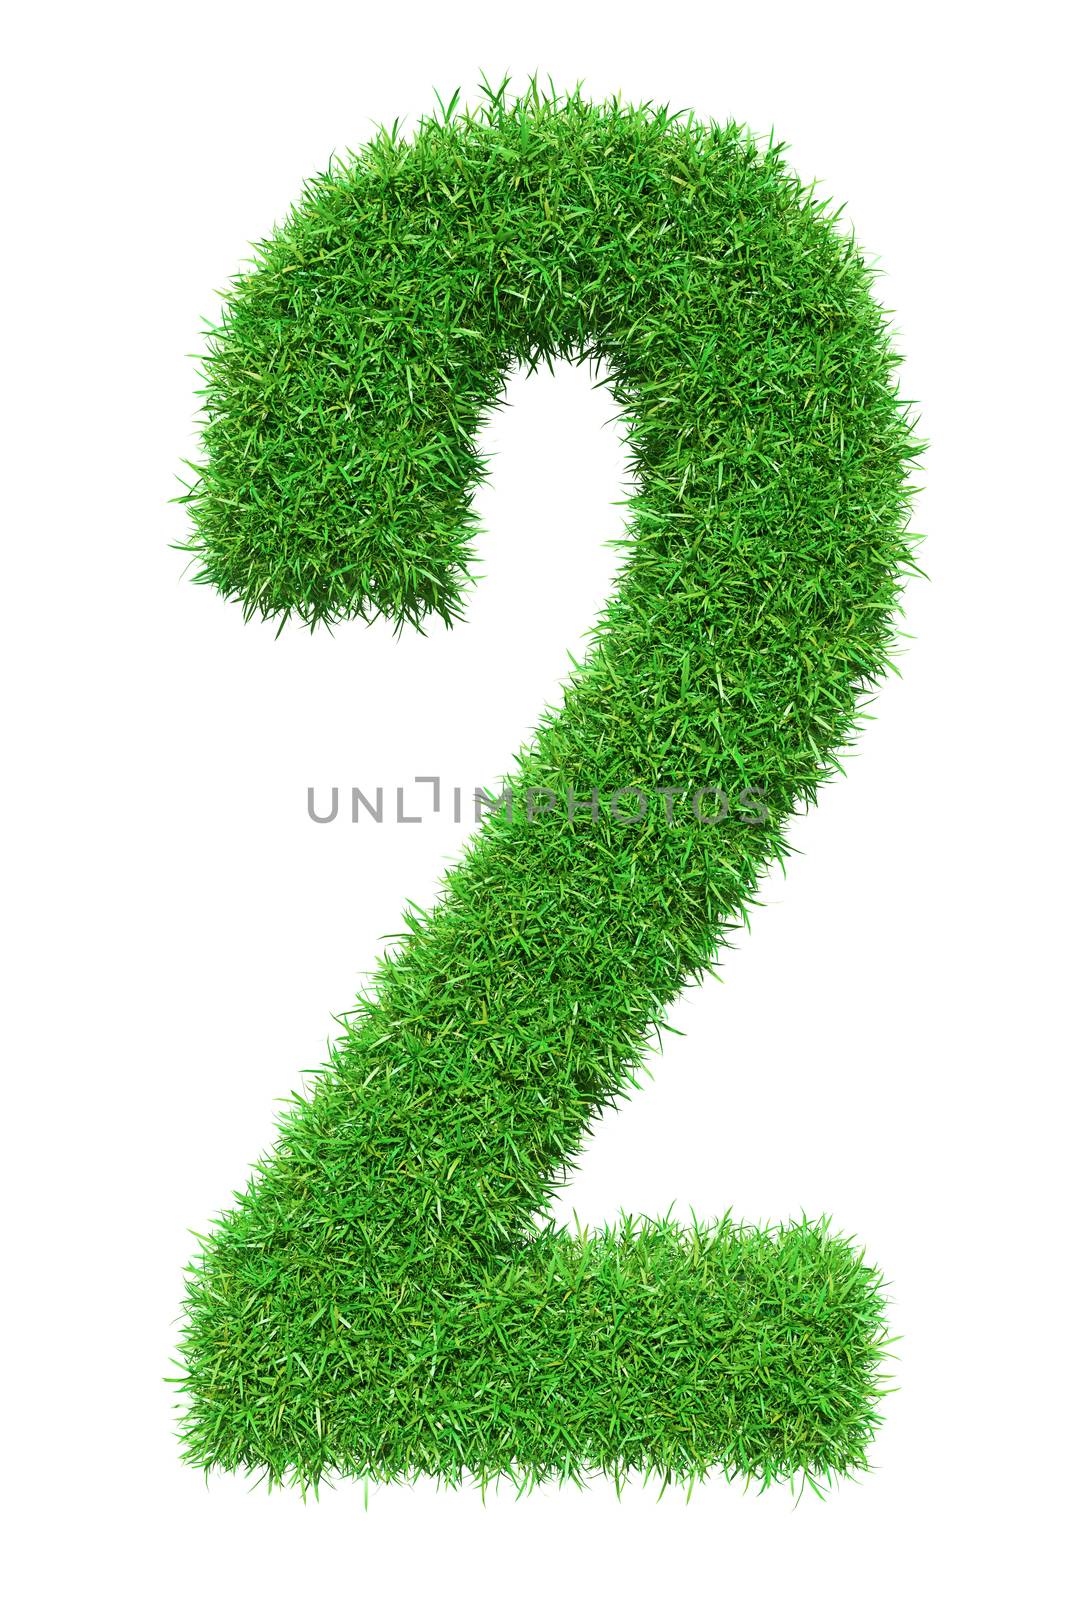 Green grass number 2, isolated on white background. 3D illustration